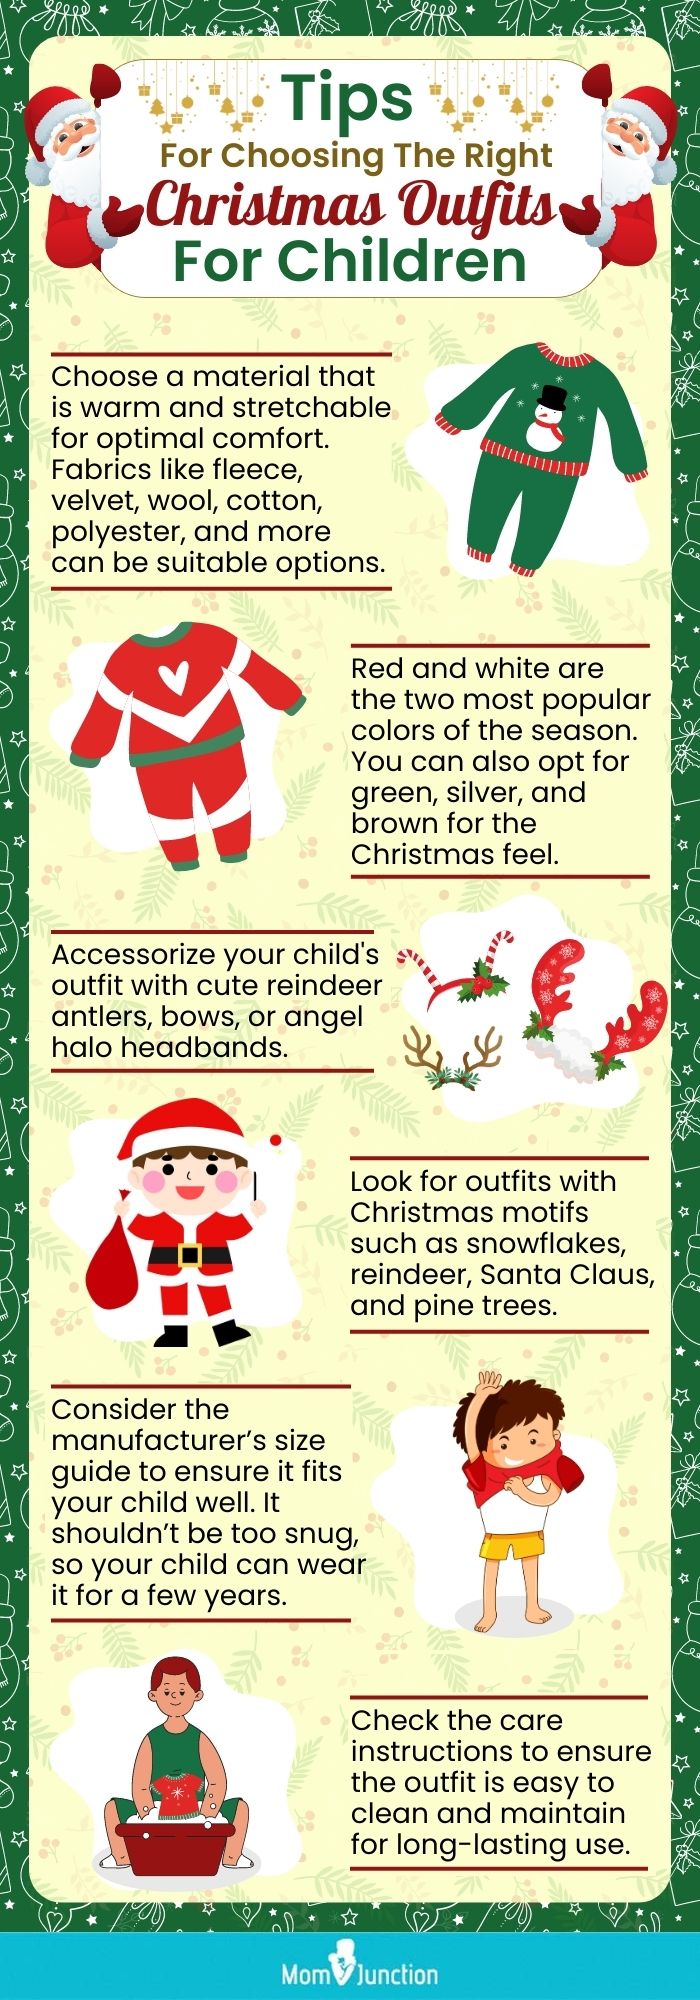 Tips For Choosing The Right Christmas Outfits For Children